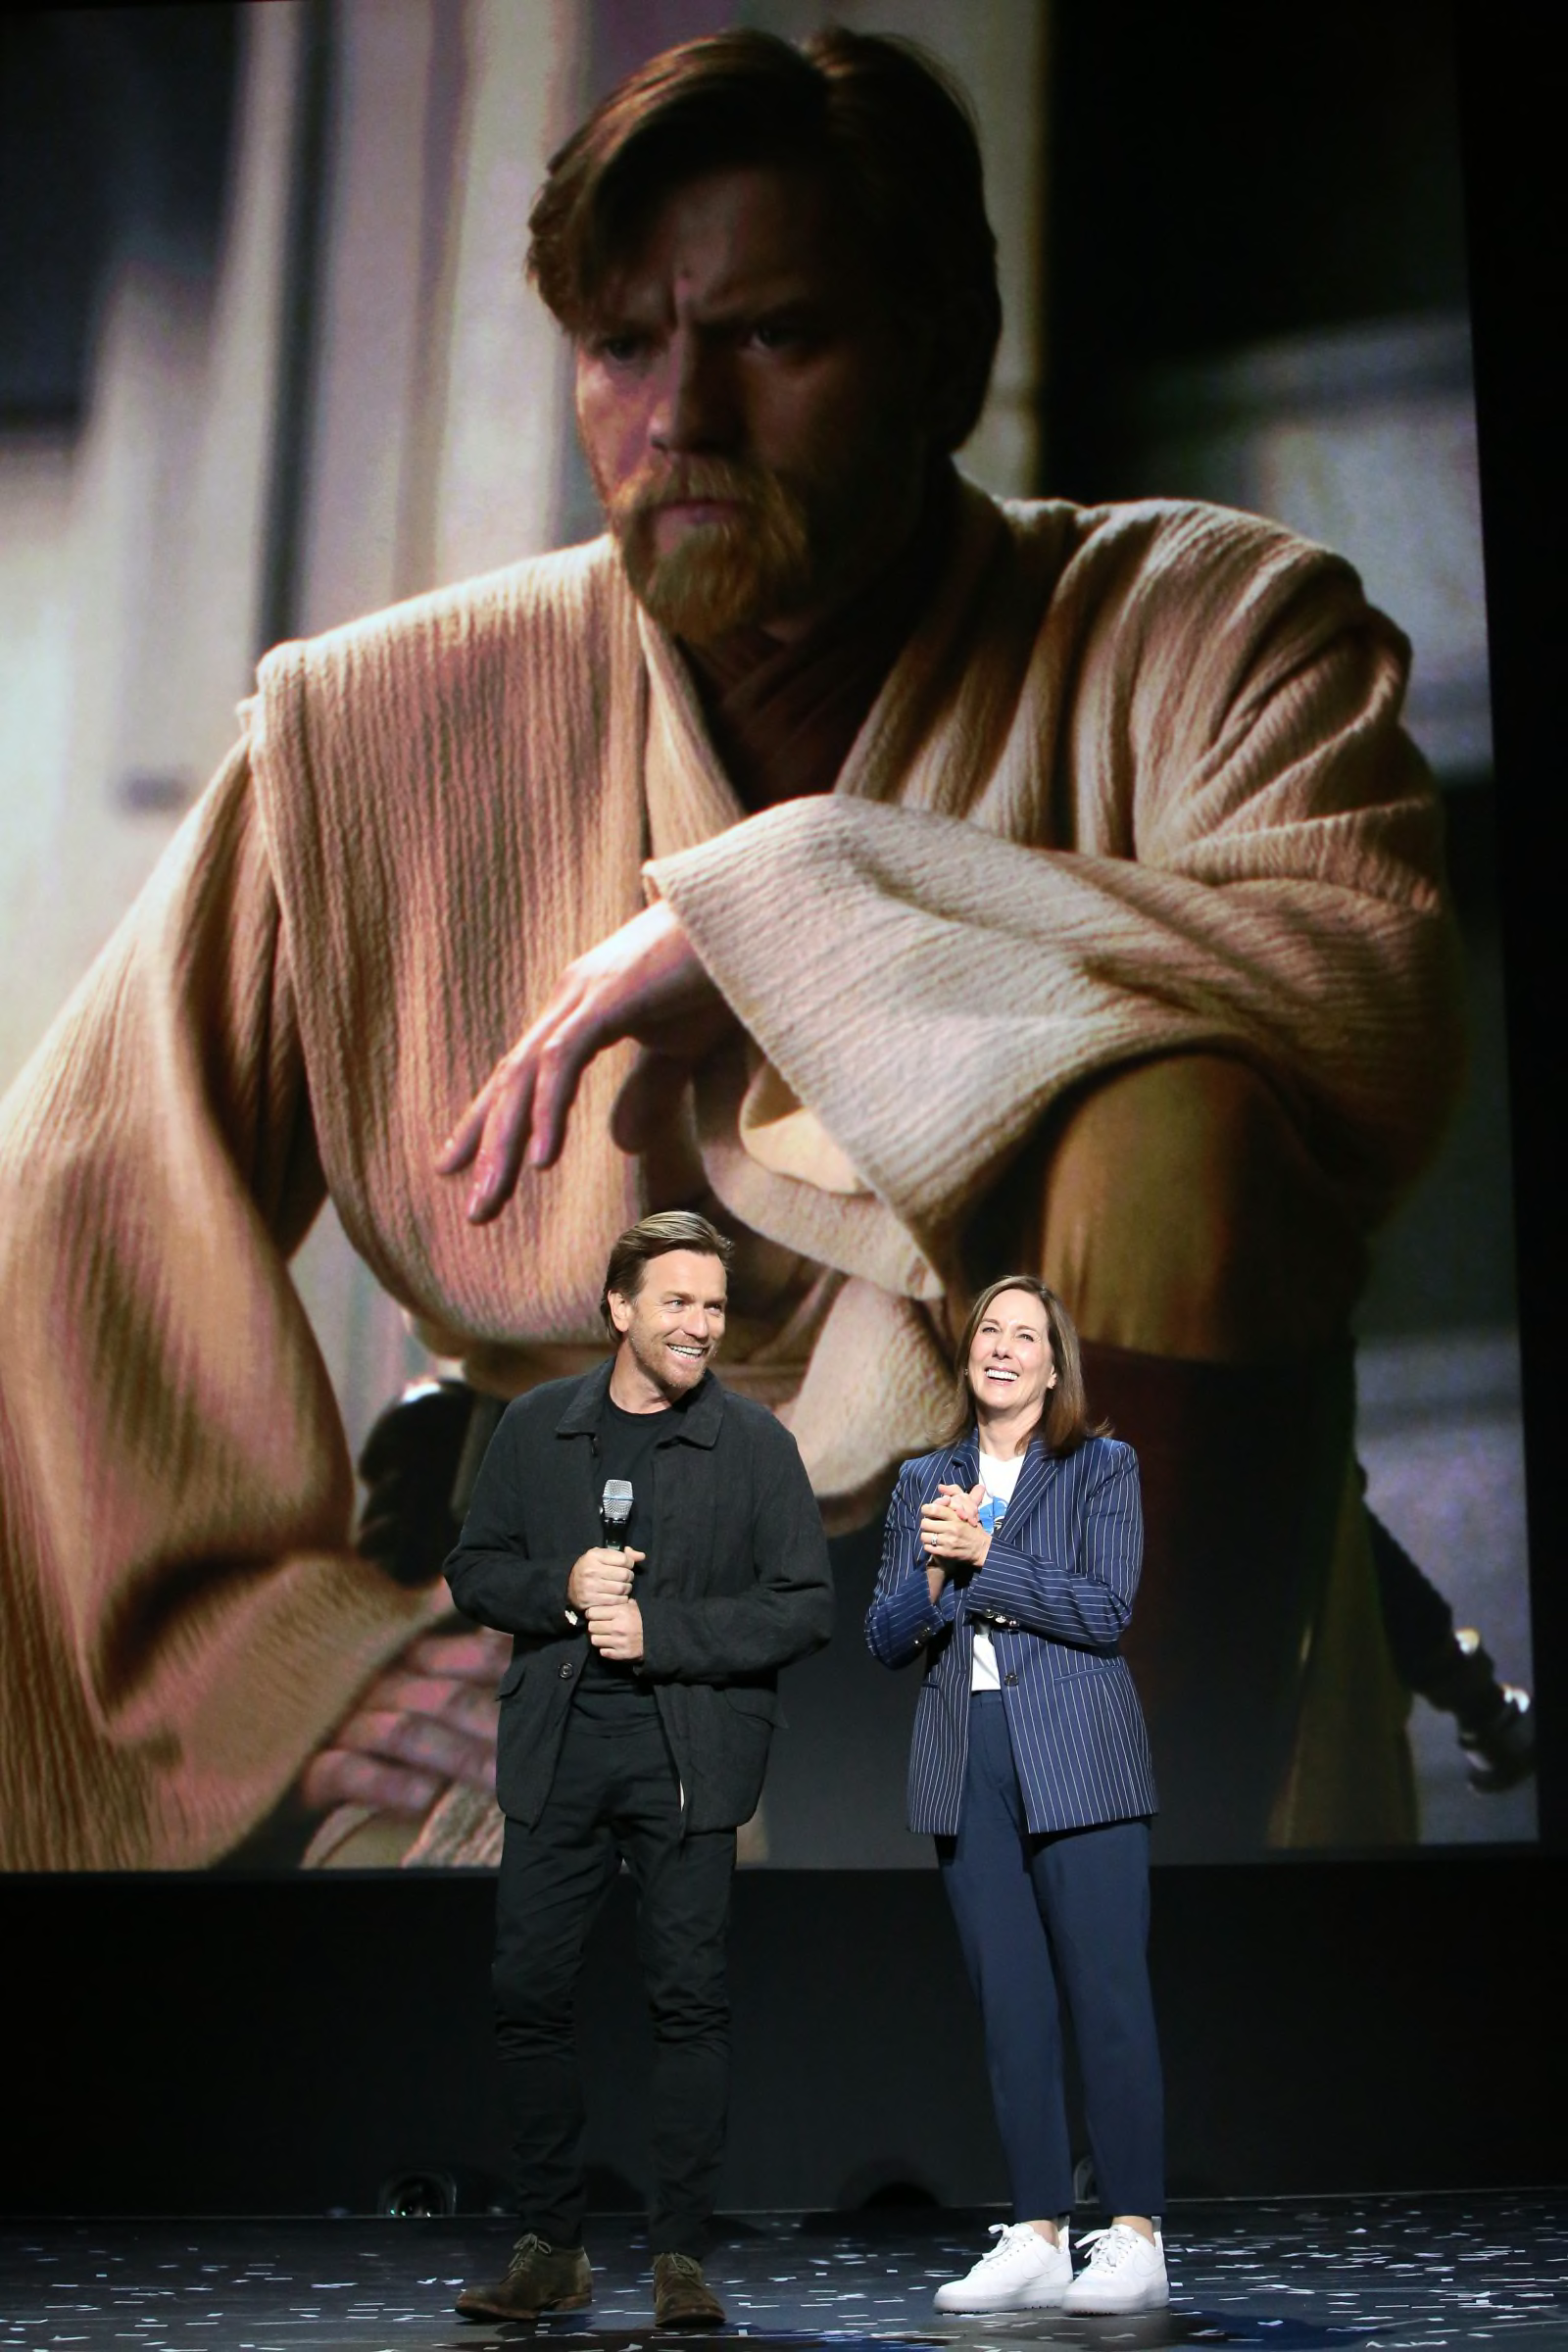 ANAHEIM, CALIFORNIA - AUGUST 23: (L-R) Ewan McGregor of 'Untitled Obi-Wan Kenobi Series' and Lucasfilm president Kathleen Kennedy took part today in the Disney+ Showcase at Disney’s D23 EXPO 2019 in Anaheim, Calif. 'Untitled Obi-Wan Kenobi Series' will stream exclusively on Disney+, which launches November 12. (Photo by Jesse Grant/Getty Images for Disney)